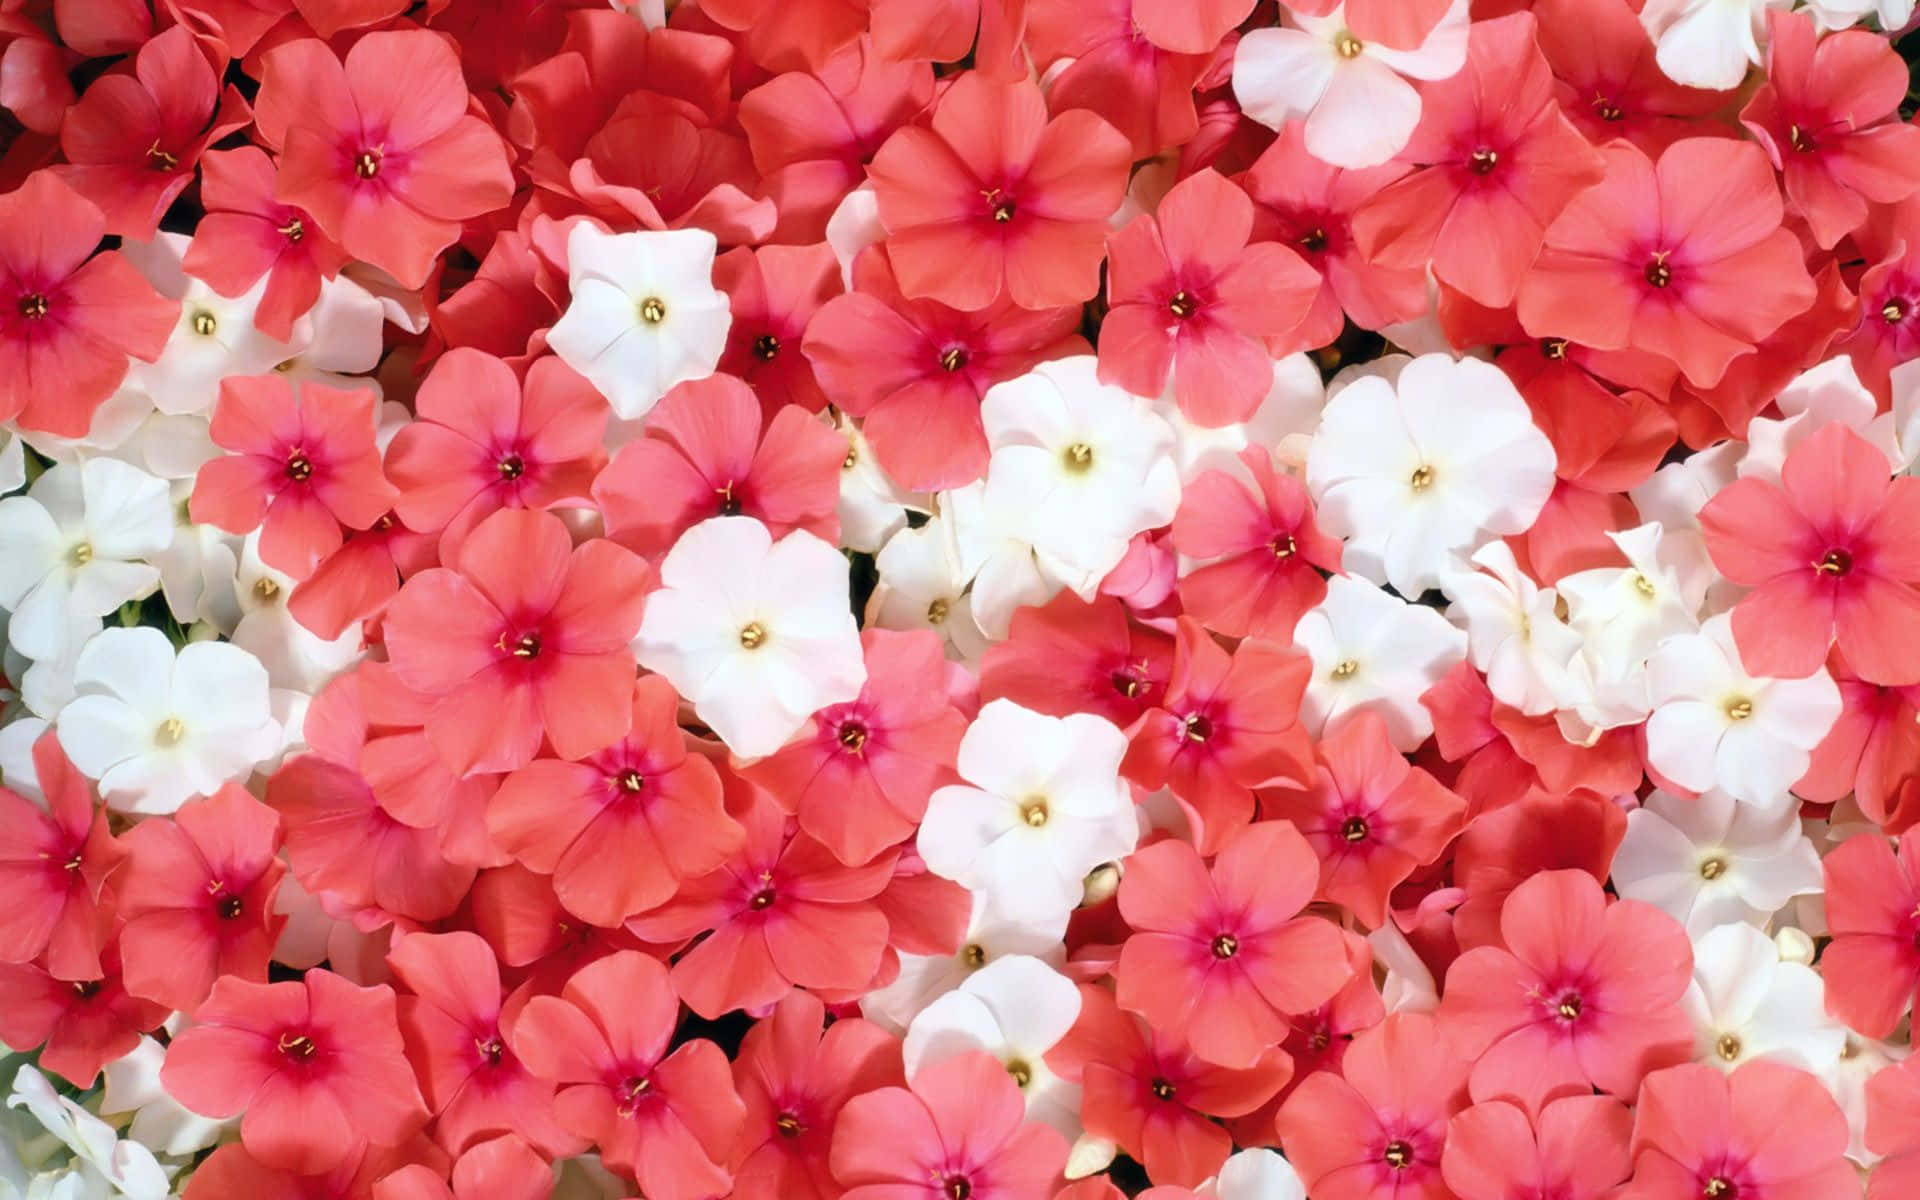 A Close Up Of Red And White Flowers